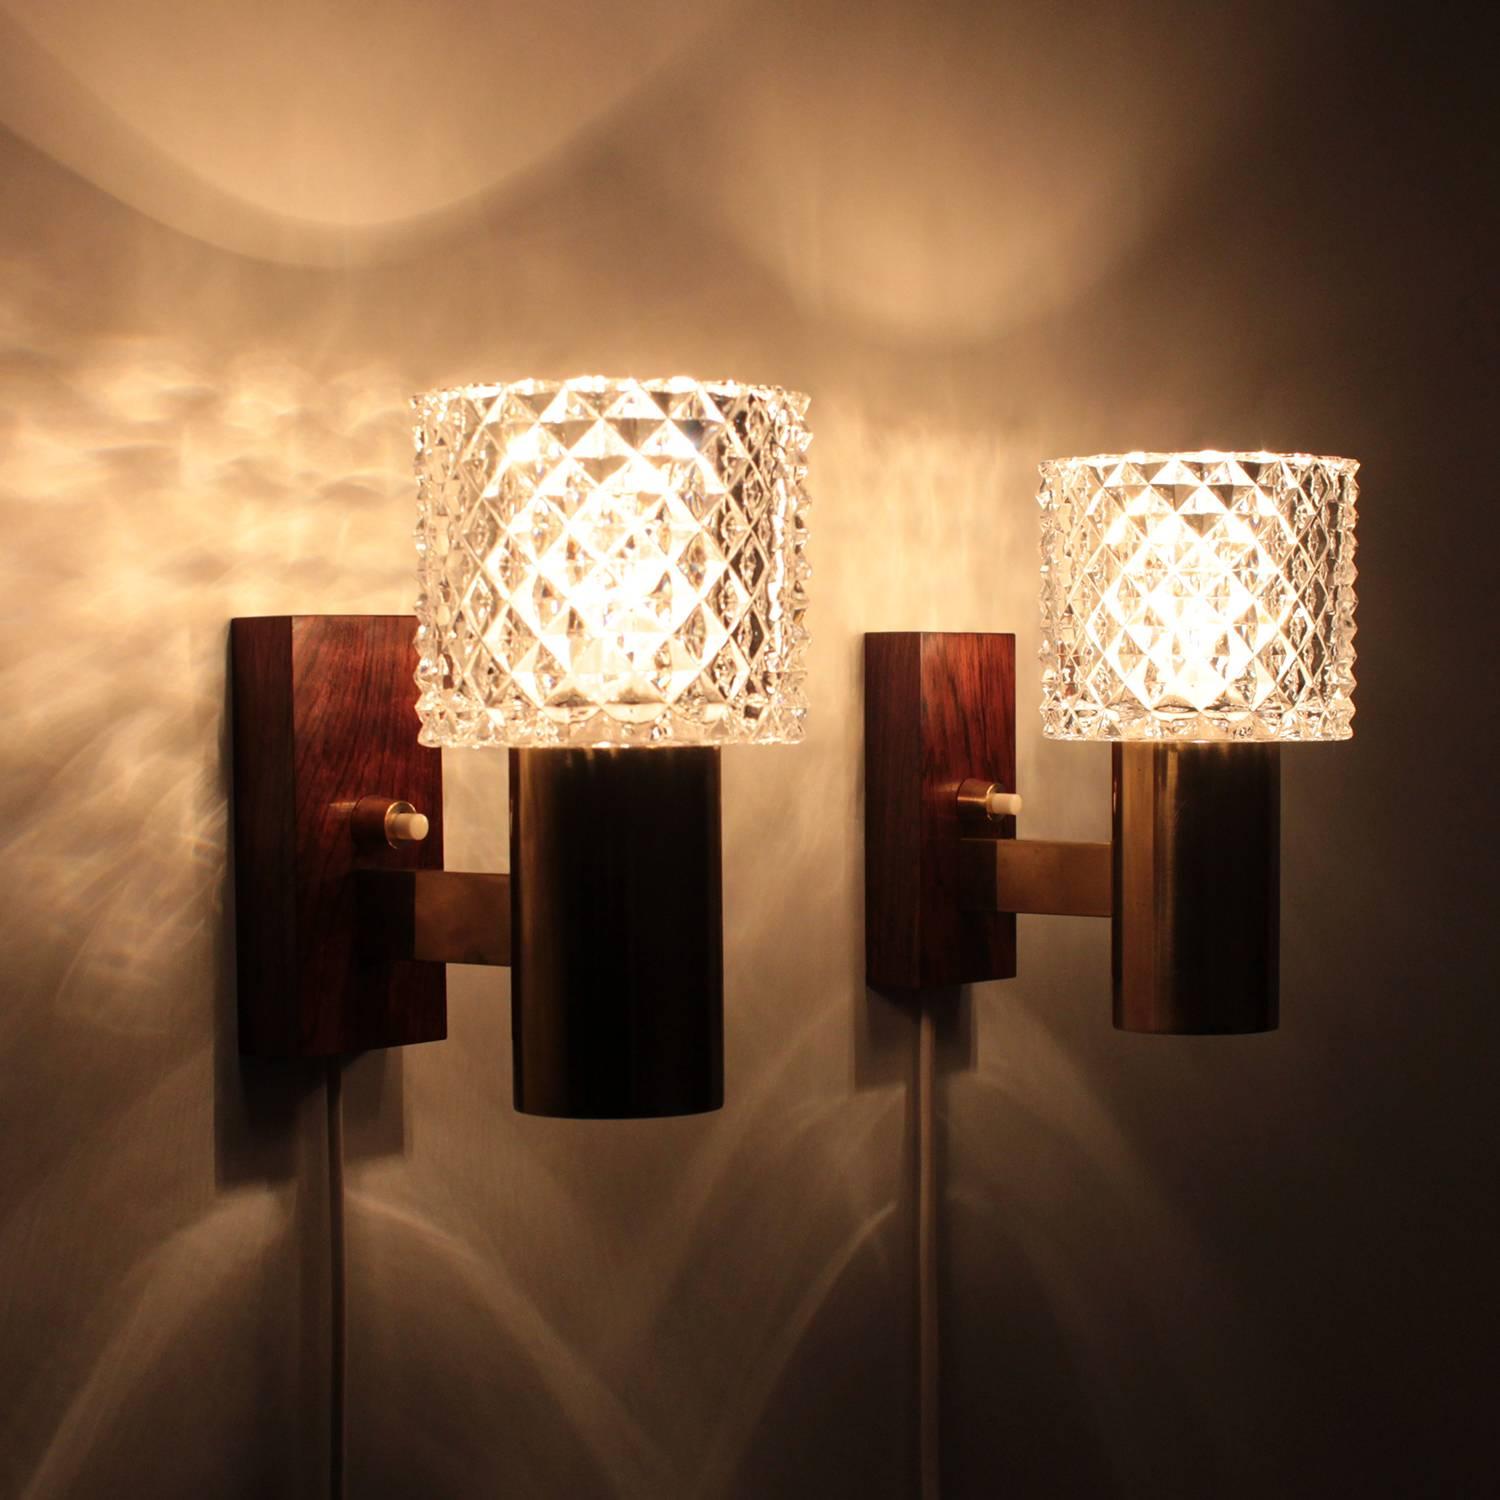 Crystal glass and rosewood pair of wall sconces from the 1960s by unknown Scandinavian producer - very stylish crystal wall lights with brass and rosewood - in excellent vintage condition.

Each light is comprised of a thick crystal glass shade, a